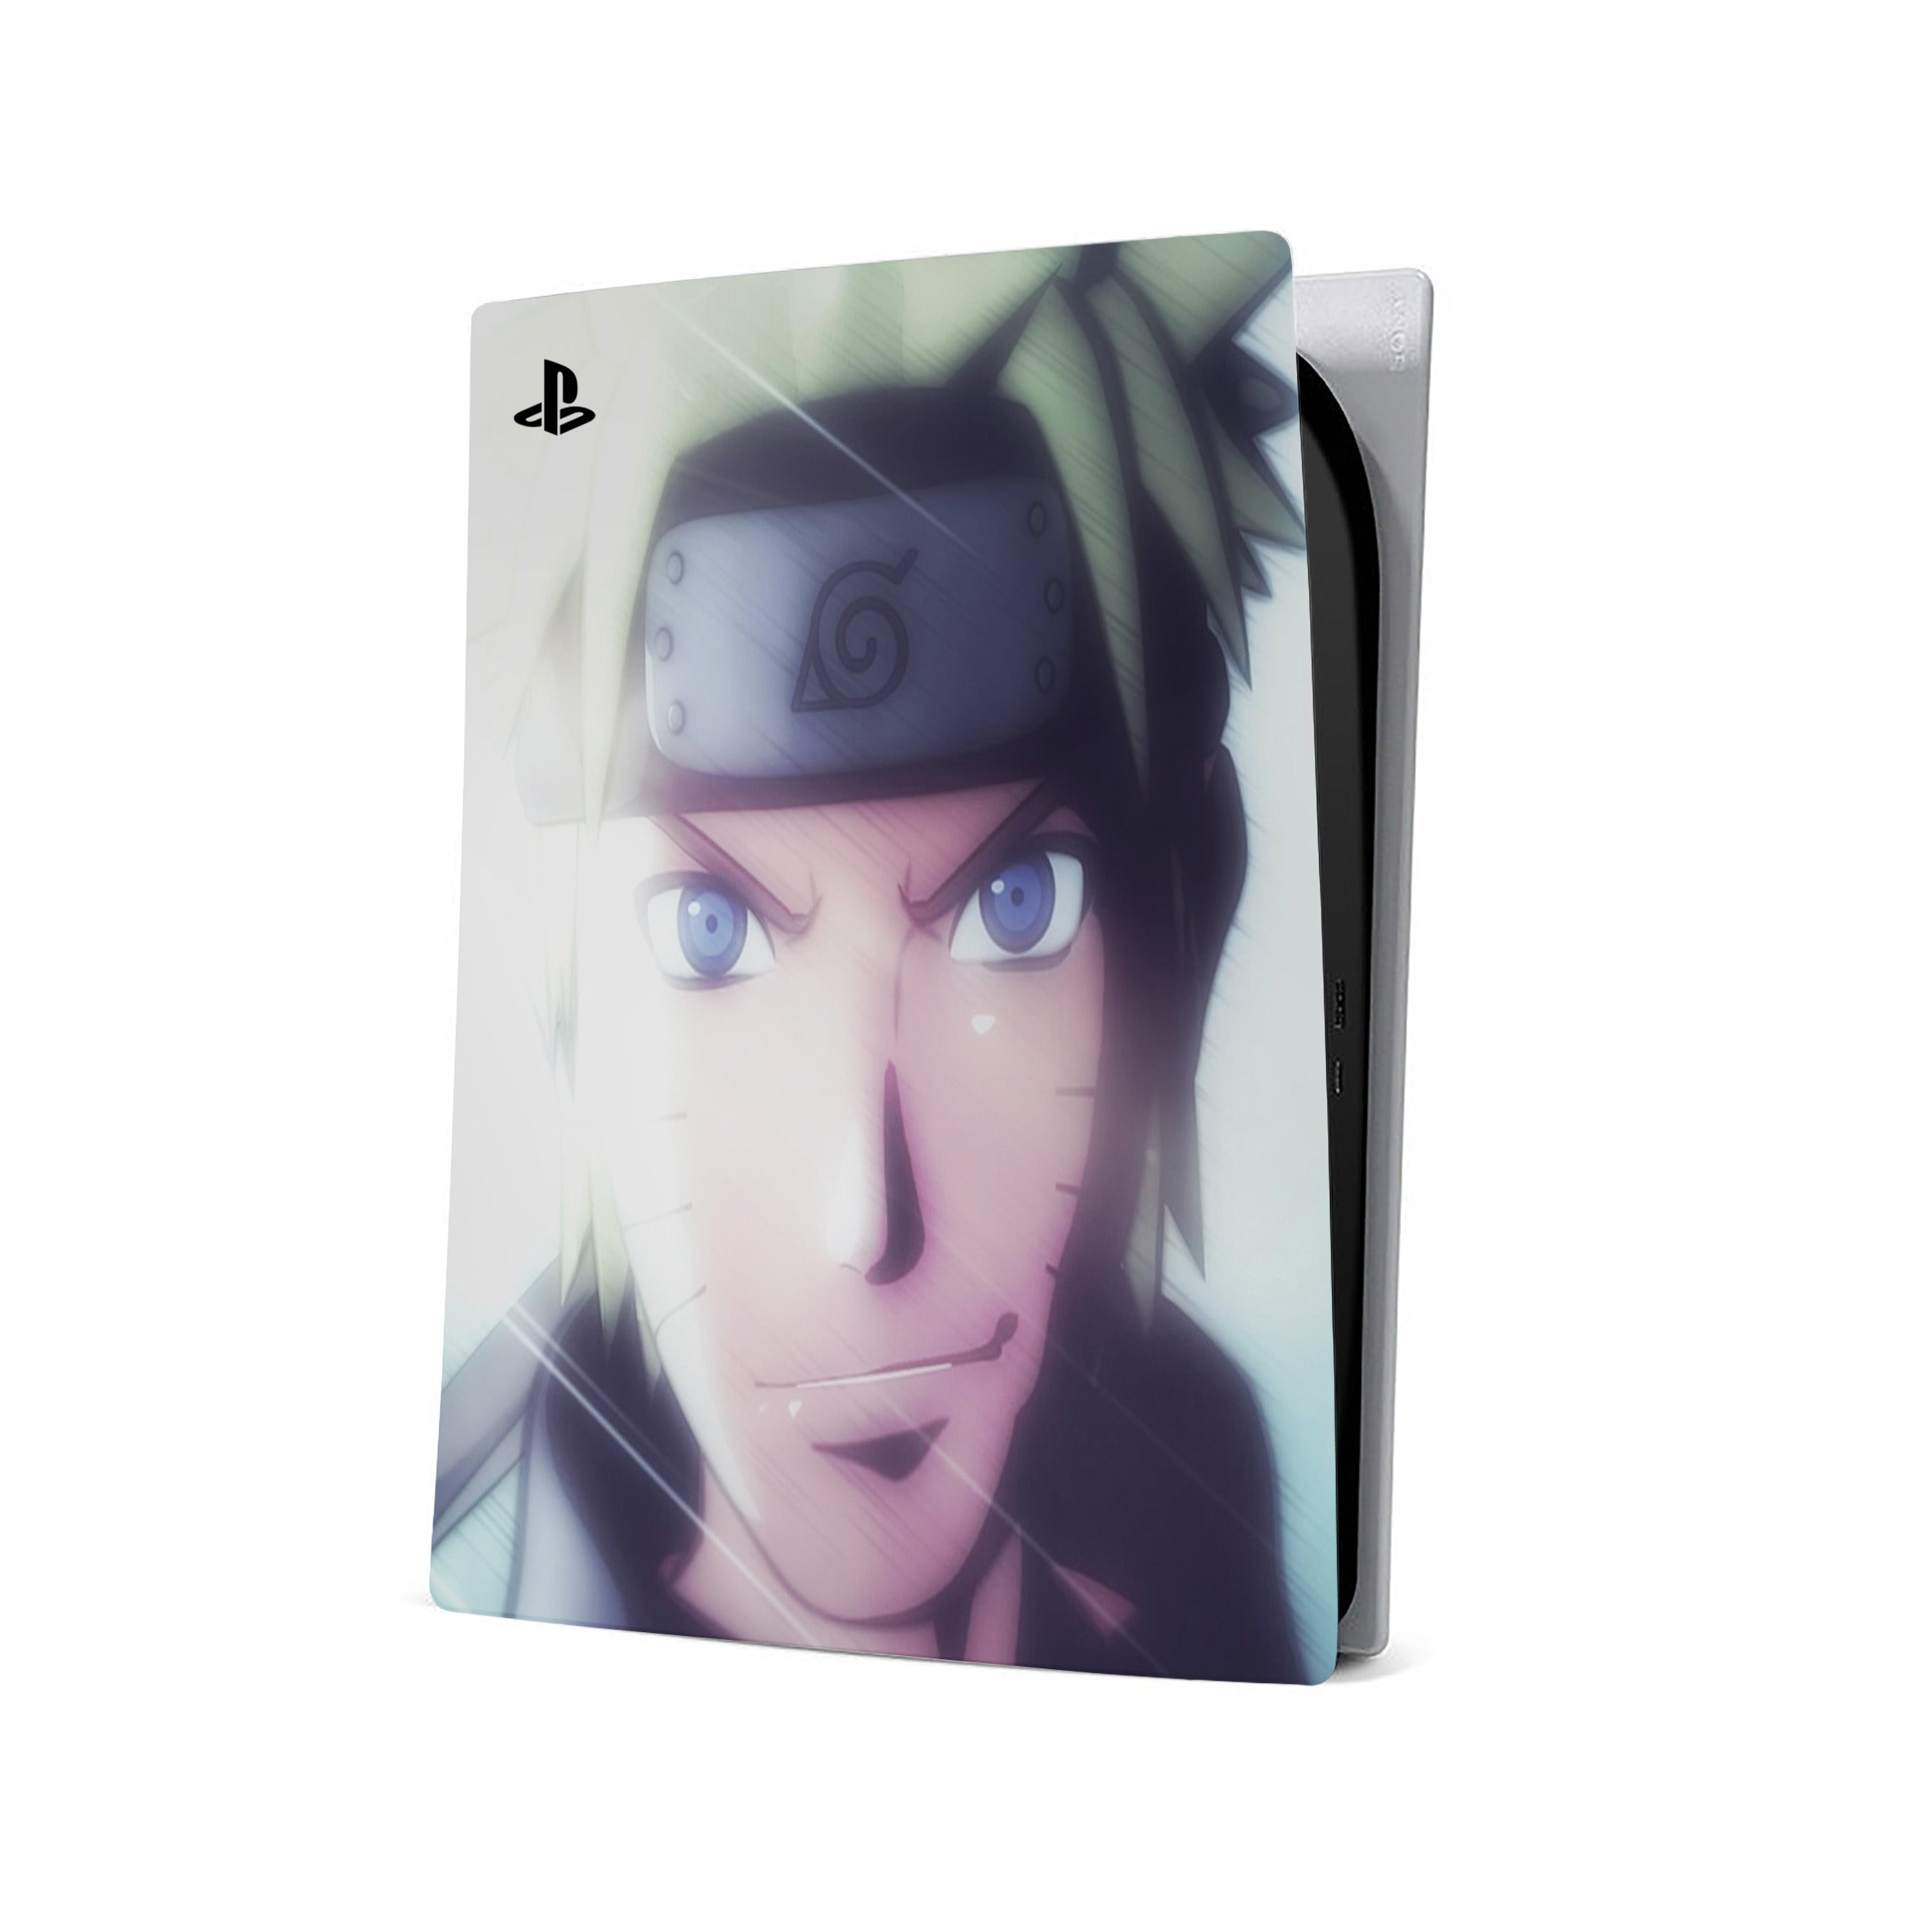 A video game skin featuring a Naruto design for the PS5.